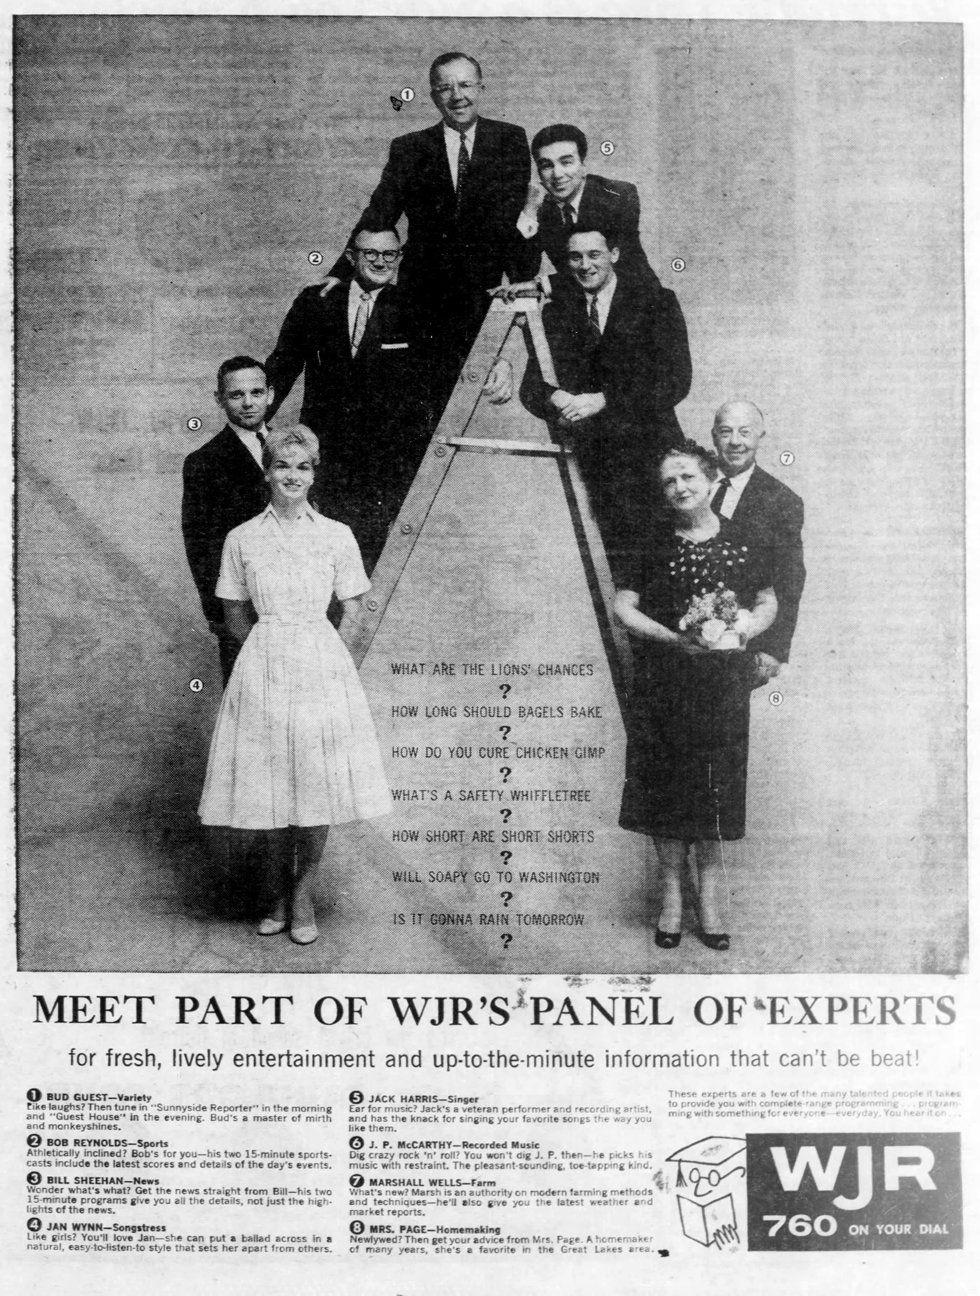 Photo in an ad for the hosts at WJR Radio, Detroit